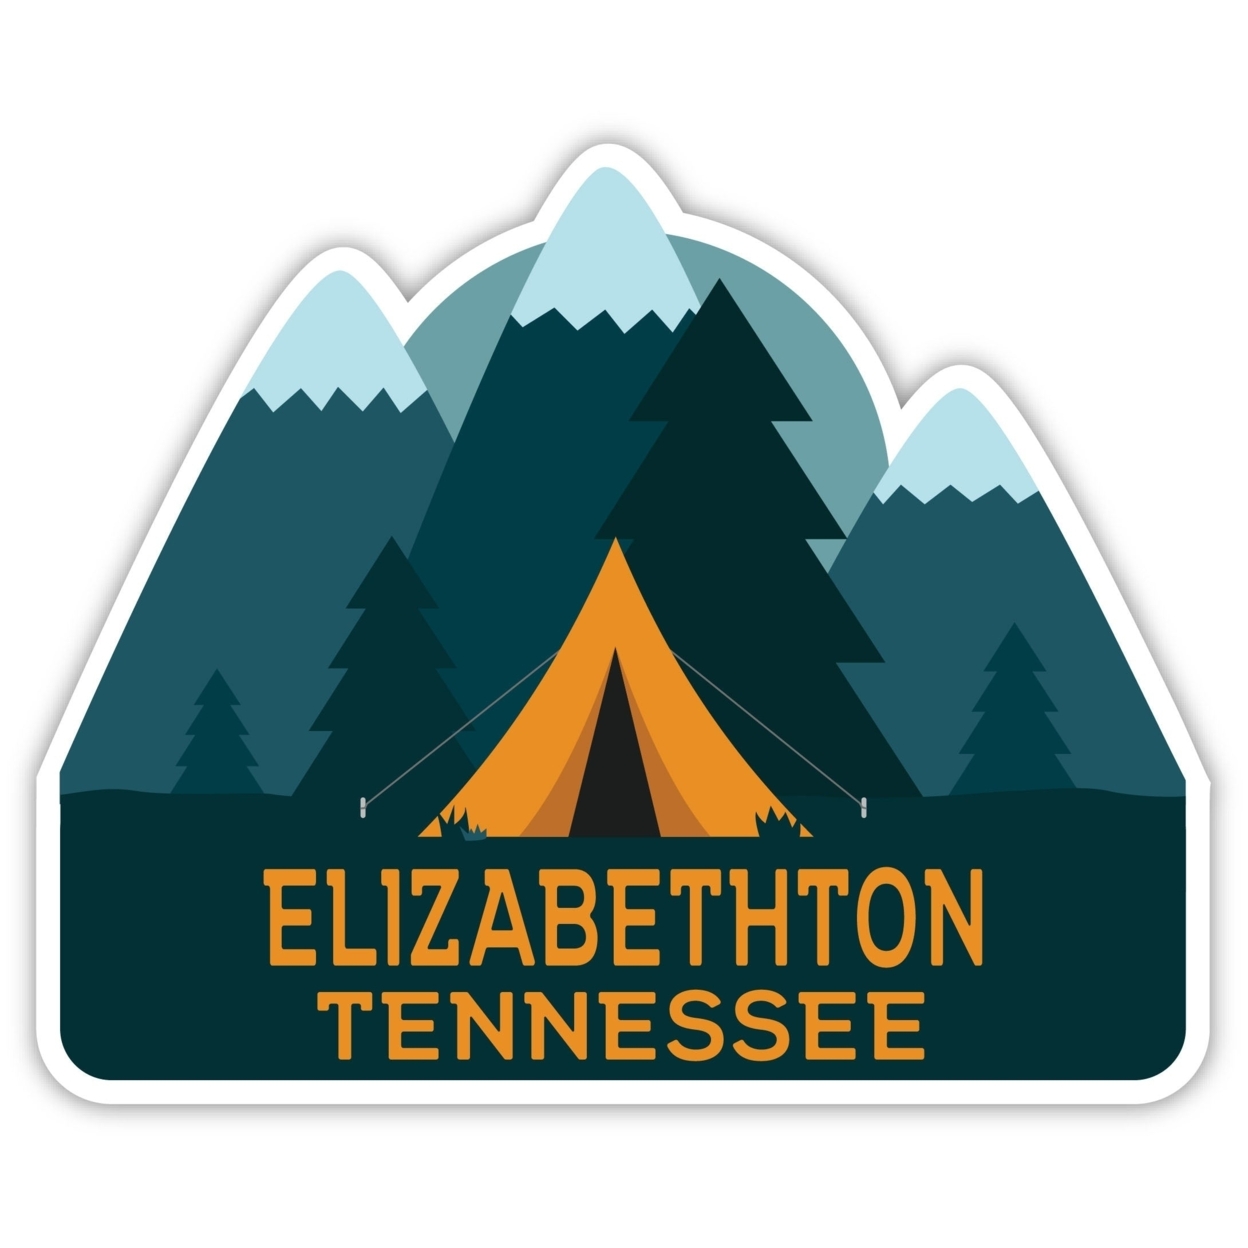 Elizabethton Tennessee Souvenir Decorative Stickers (Choose Theme And Size) - 4-Pack, 10-Inch, Tent